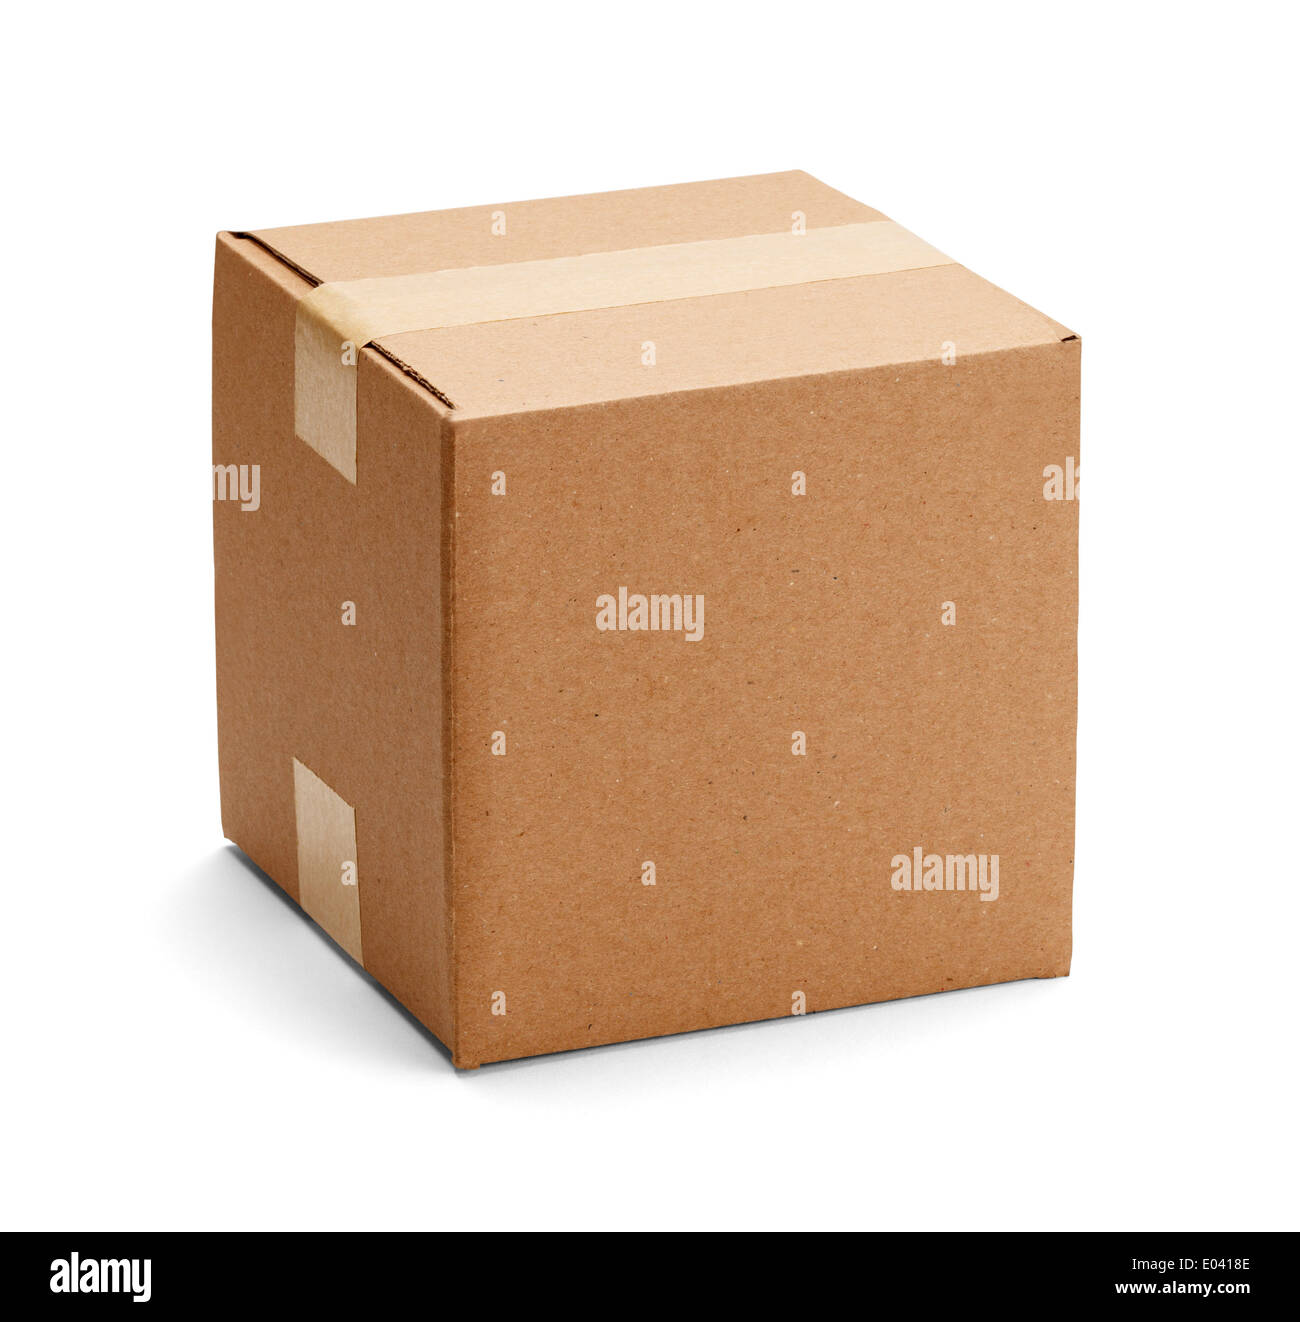 Closed cardboard box taped up and isolated on a white background. Stock Photo